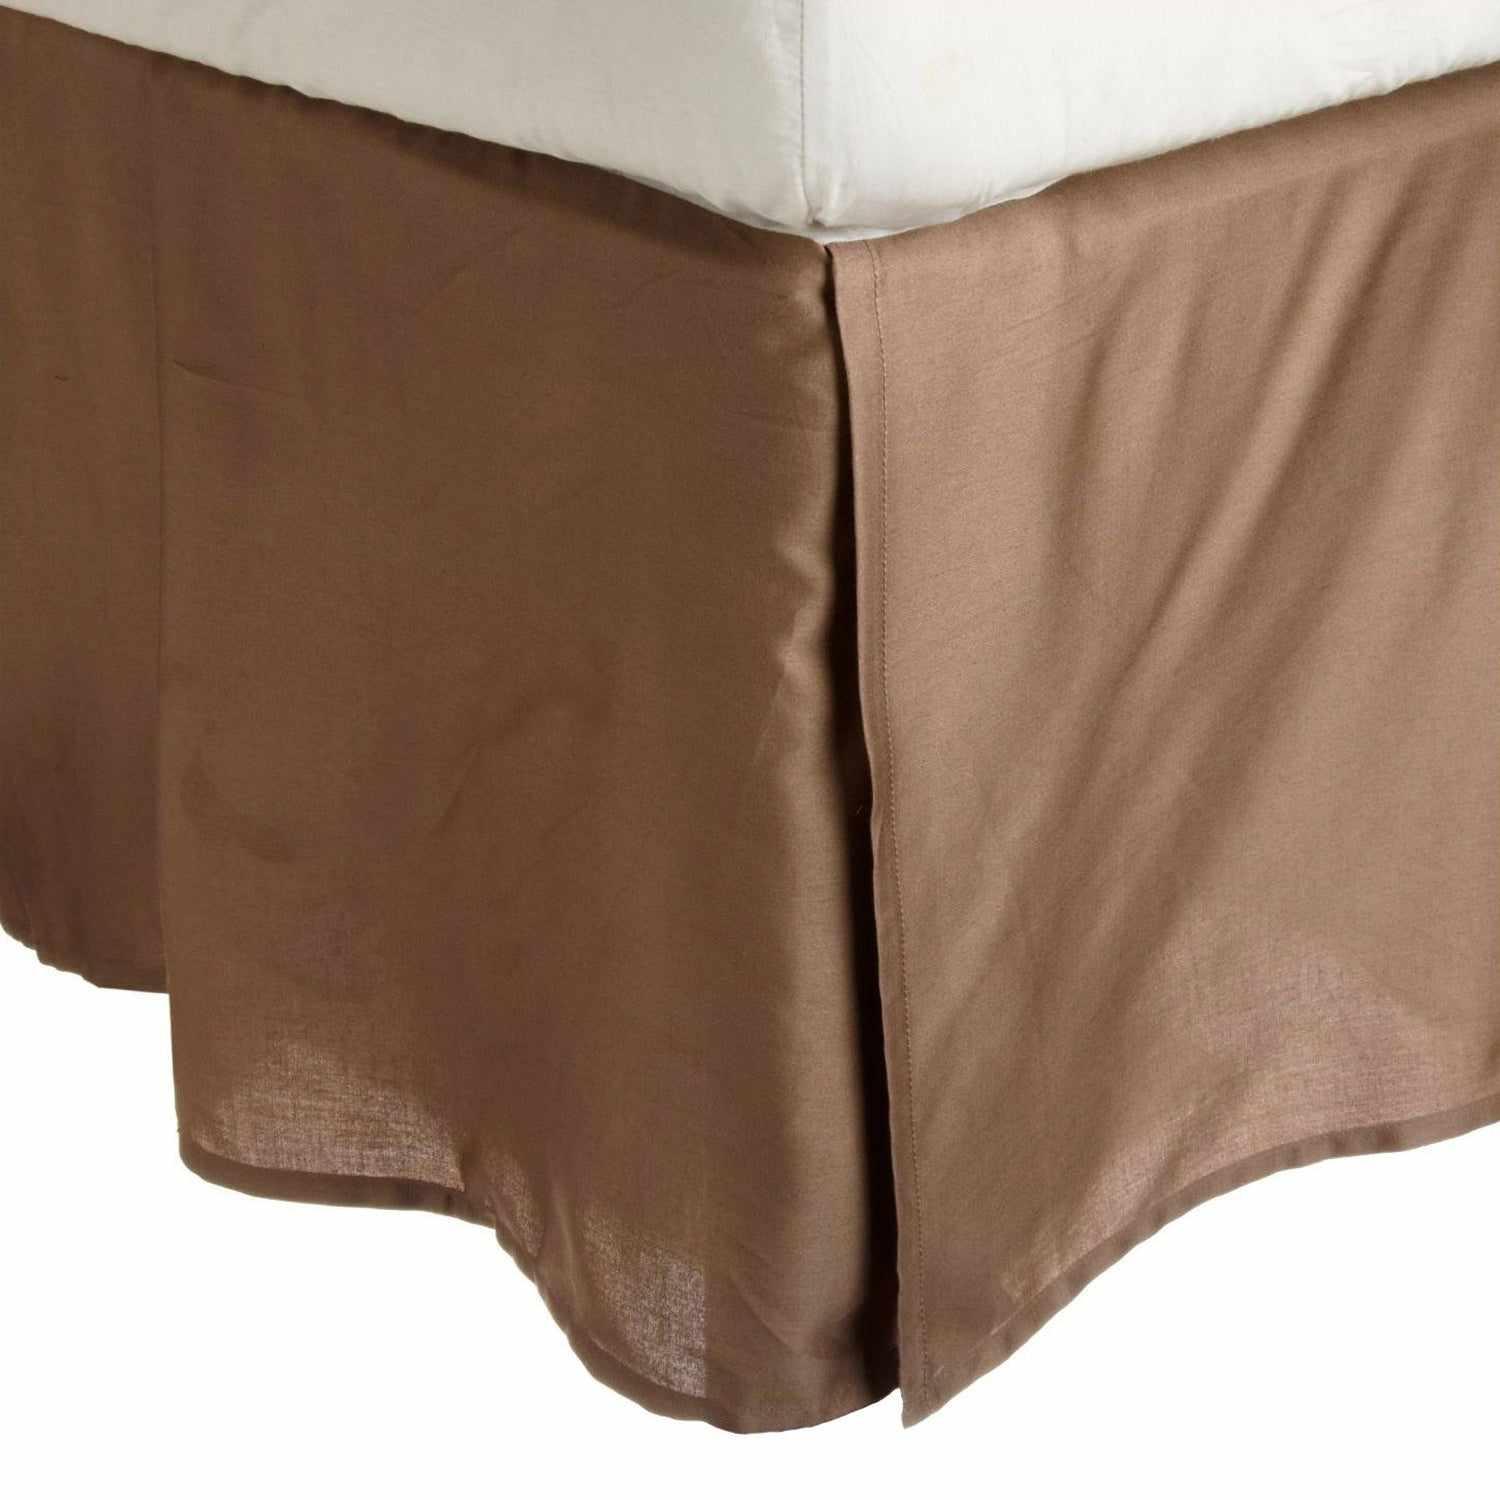  Solid Microfiber Wrinkle Free 15 Inch Drop Bed Skirt - Taupe